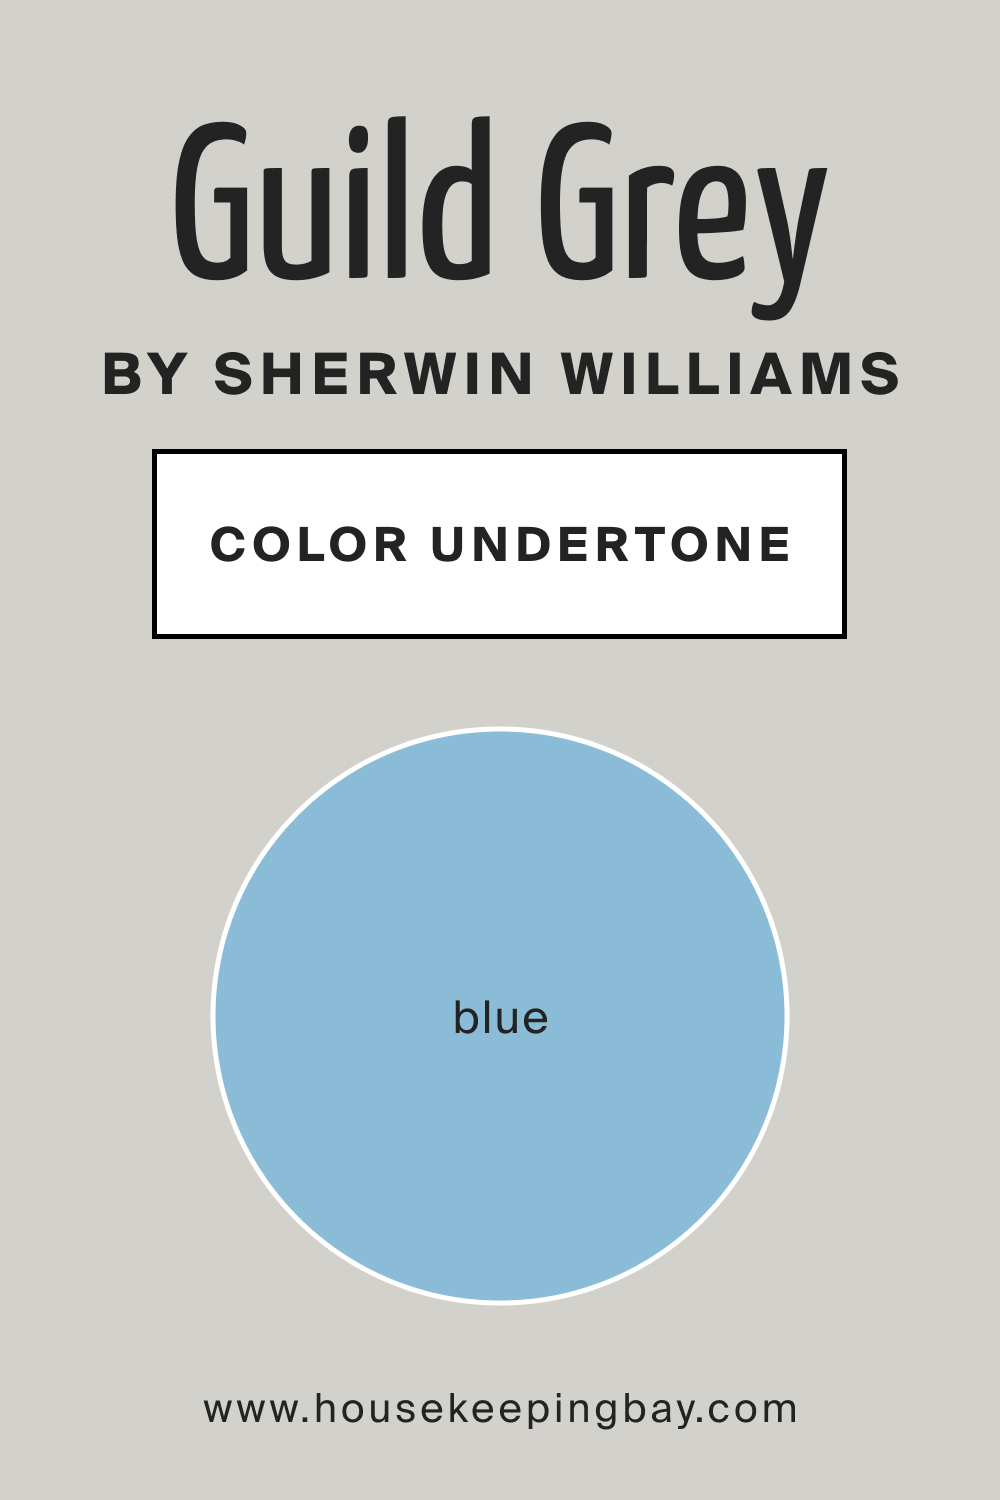 SW 9561 Guild Grey by Sherwin Williams Color Undertone